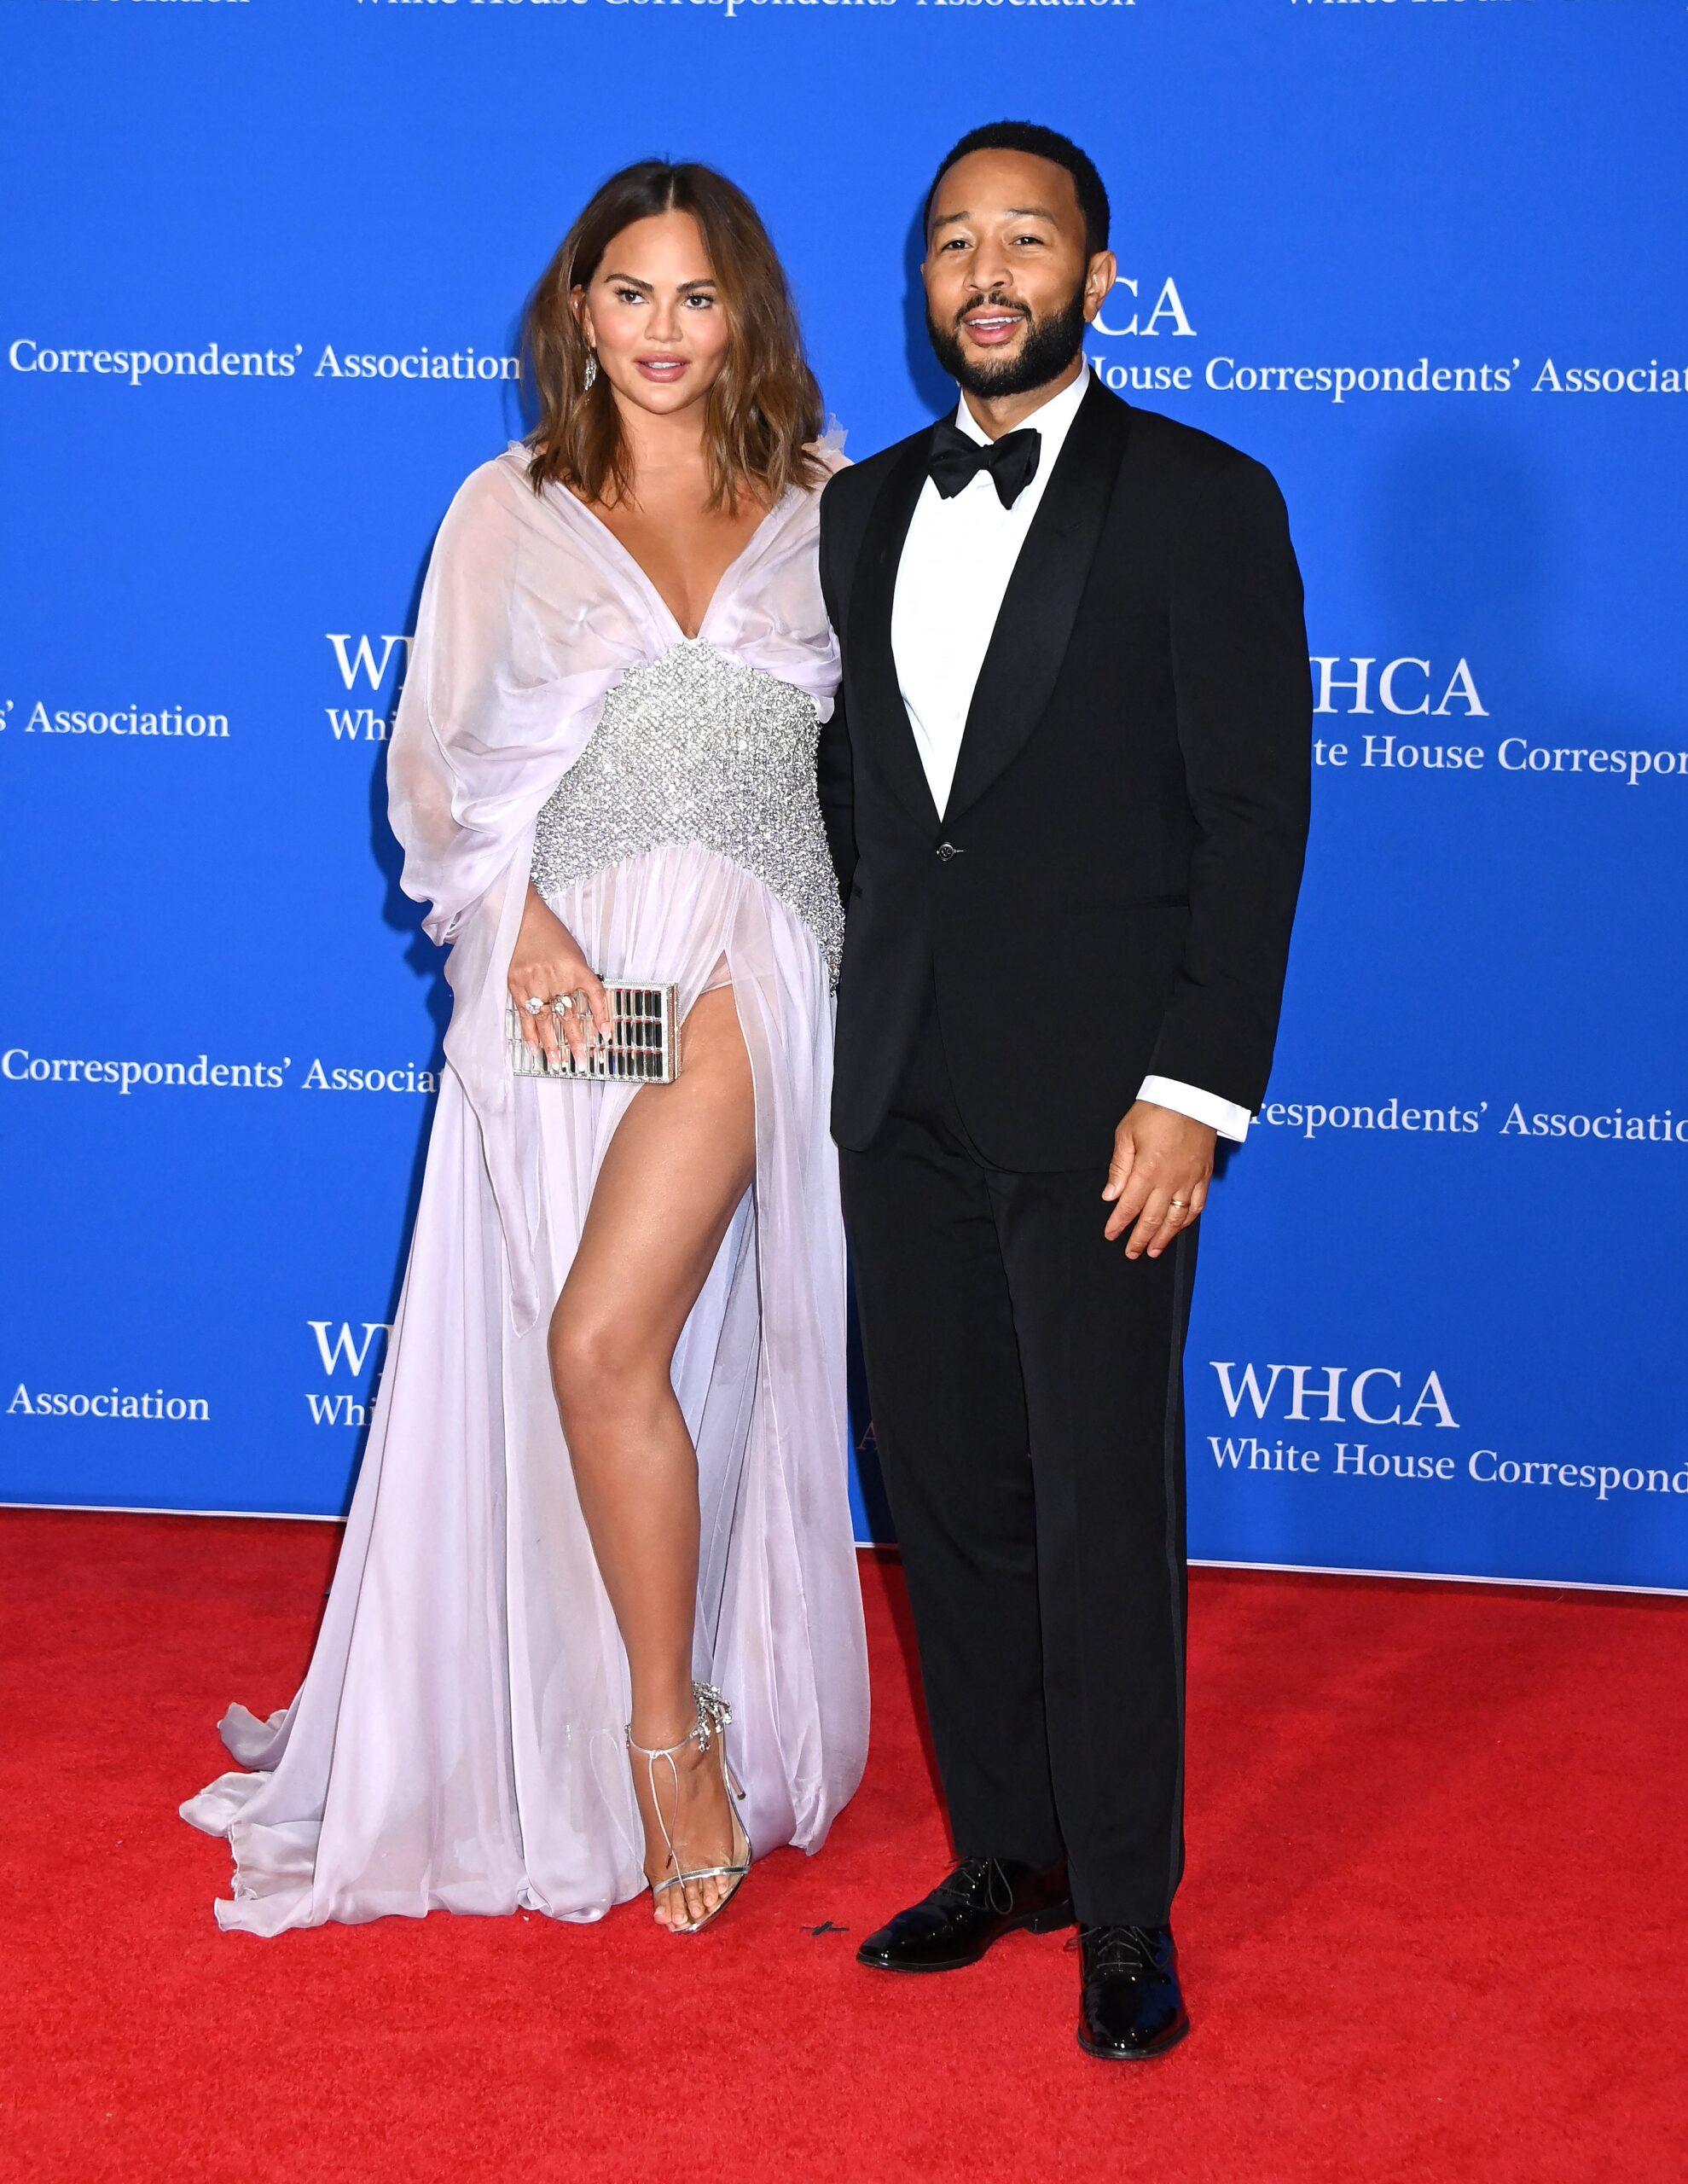 Chrissy Teigen and John Legend at the White House Correspondents Dinner